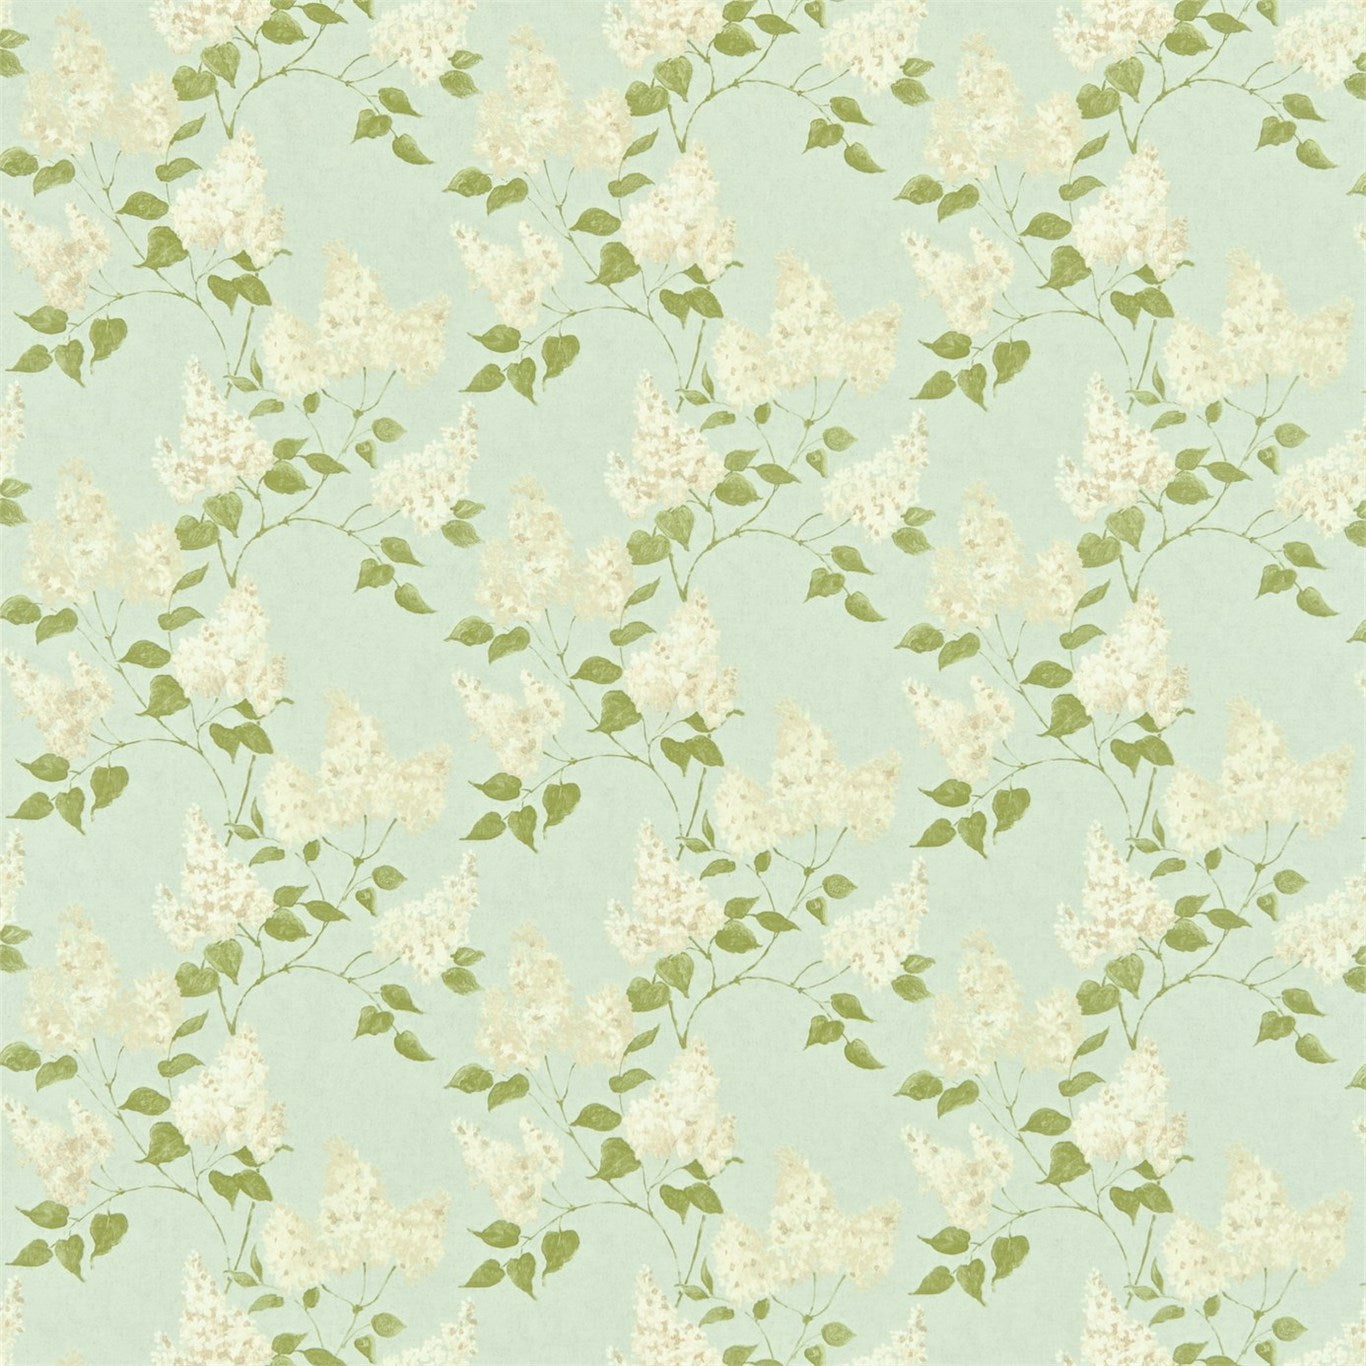 Lilacs Fabric by Sanderson Home